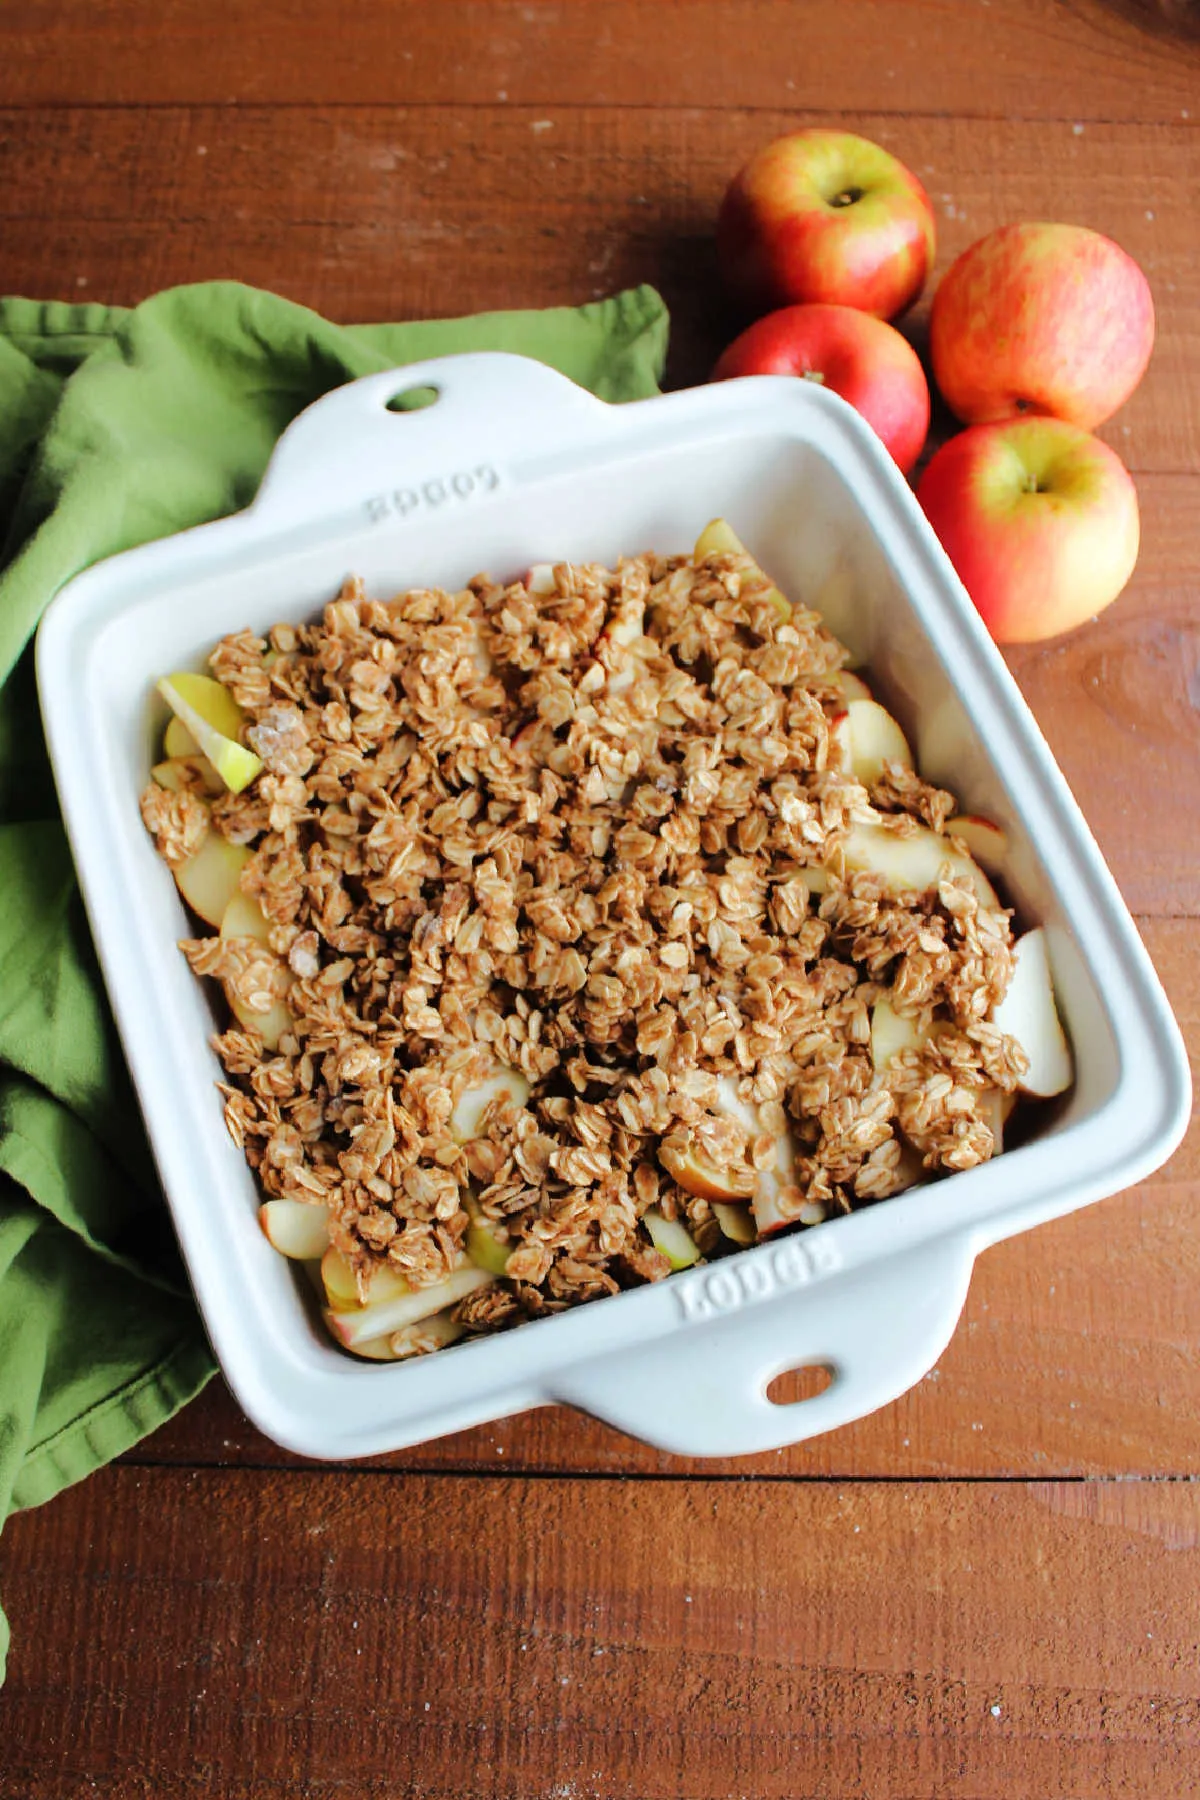 Square baking dish filled with fresh baked apple crisp with golden oat crumbles on top.